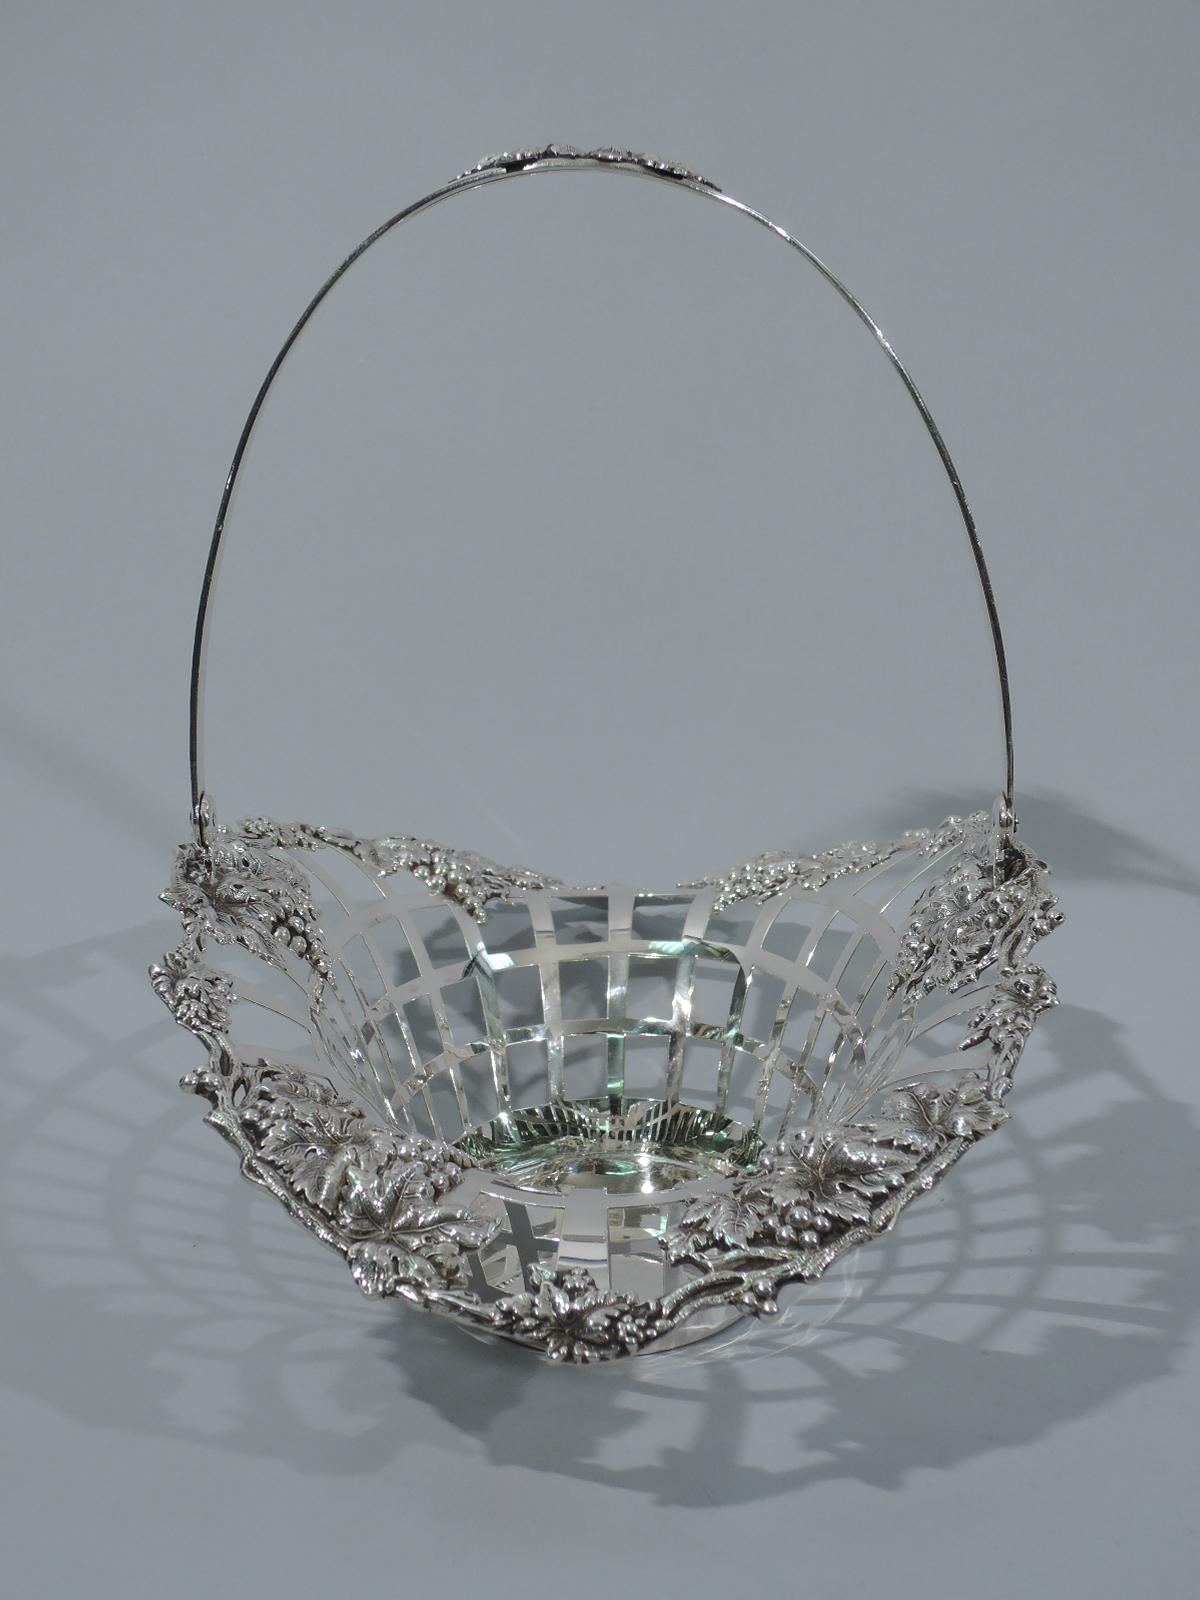 Turn-of-the-century American sterling silver basket. Solid and oval well. Sides open trellis with flared ends. Irregular vine rim with grape bunches applied to interior. Reeded and tapering swing handle with leaves applied to open center. Fully